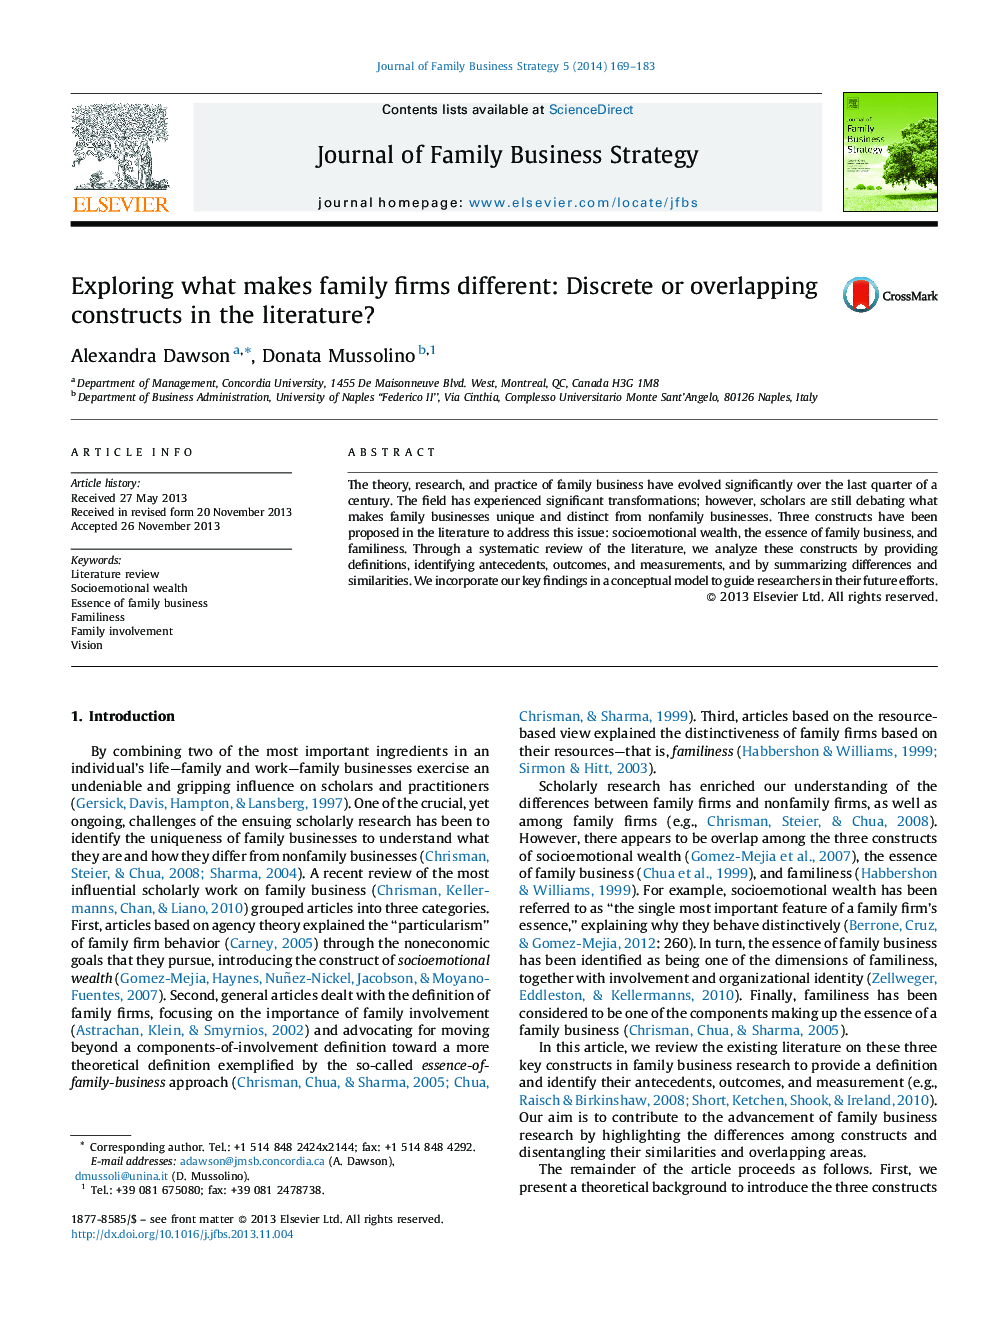 Exploring what makes family firms different: Discrete or overlapping constructs in the literature?